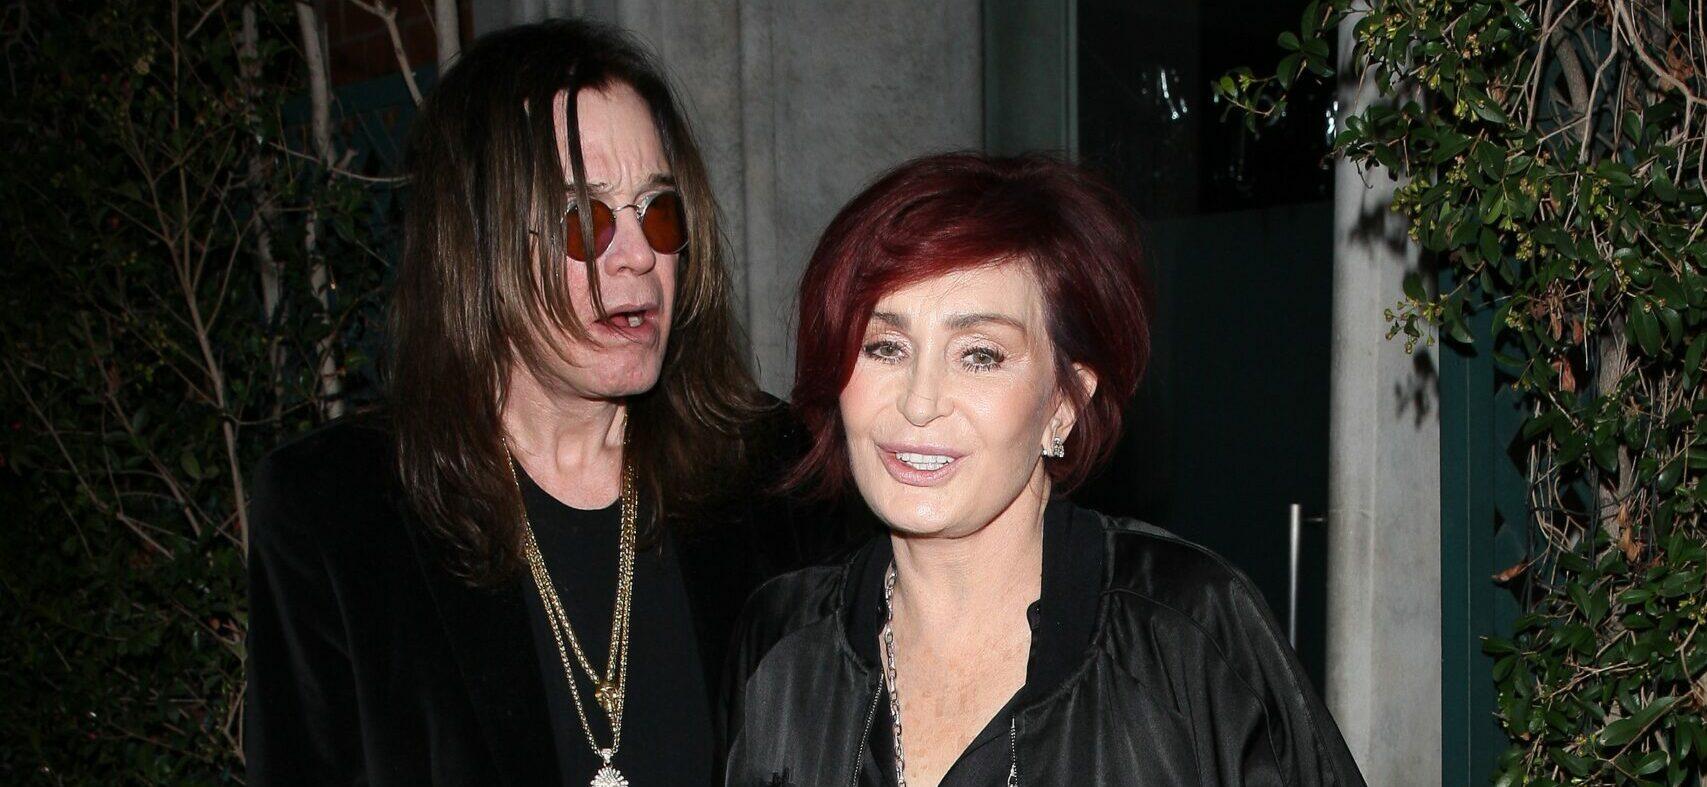 Ozzy and Sharon Osbourne hold hands as they leave Mr Chow restaurant after celebrating Billy Idol apos s 63rd birthday party